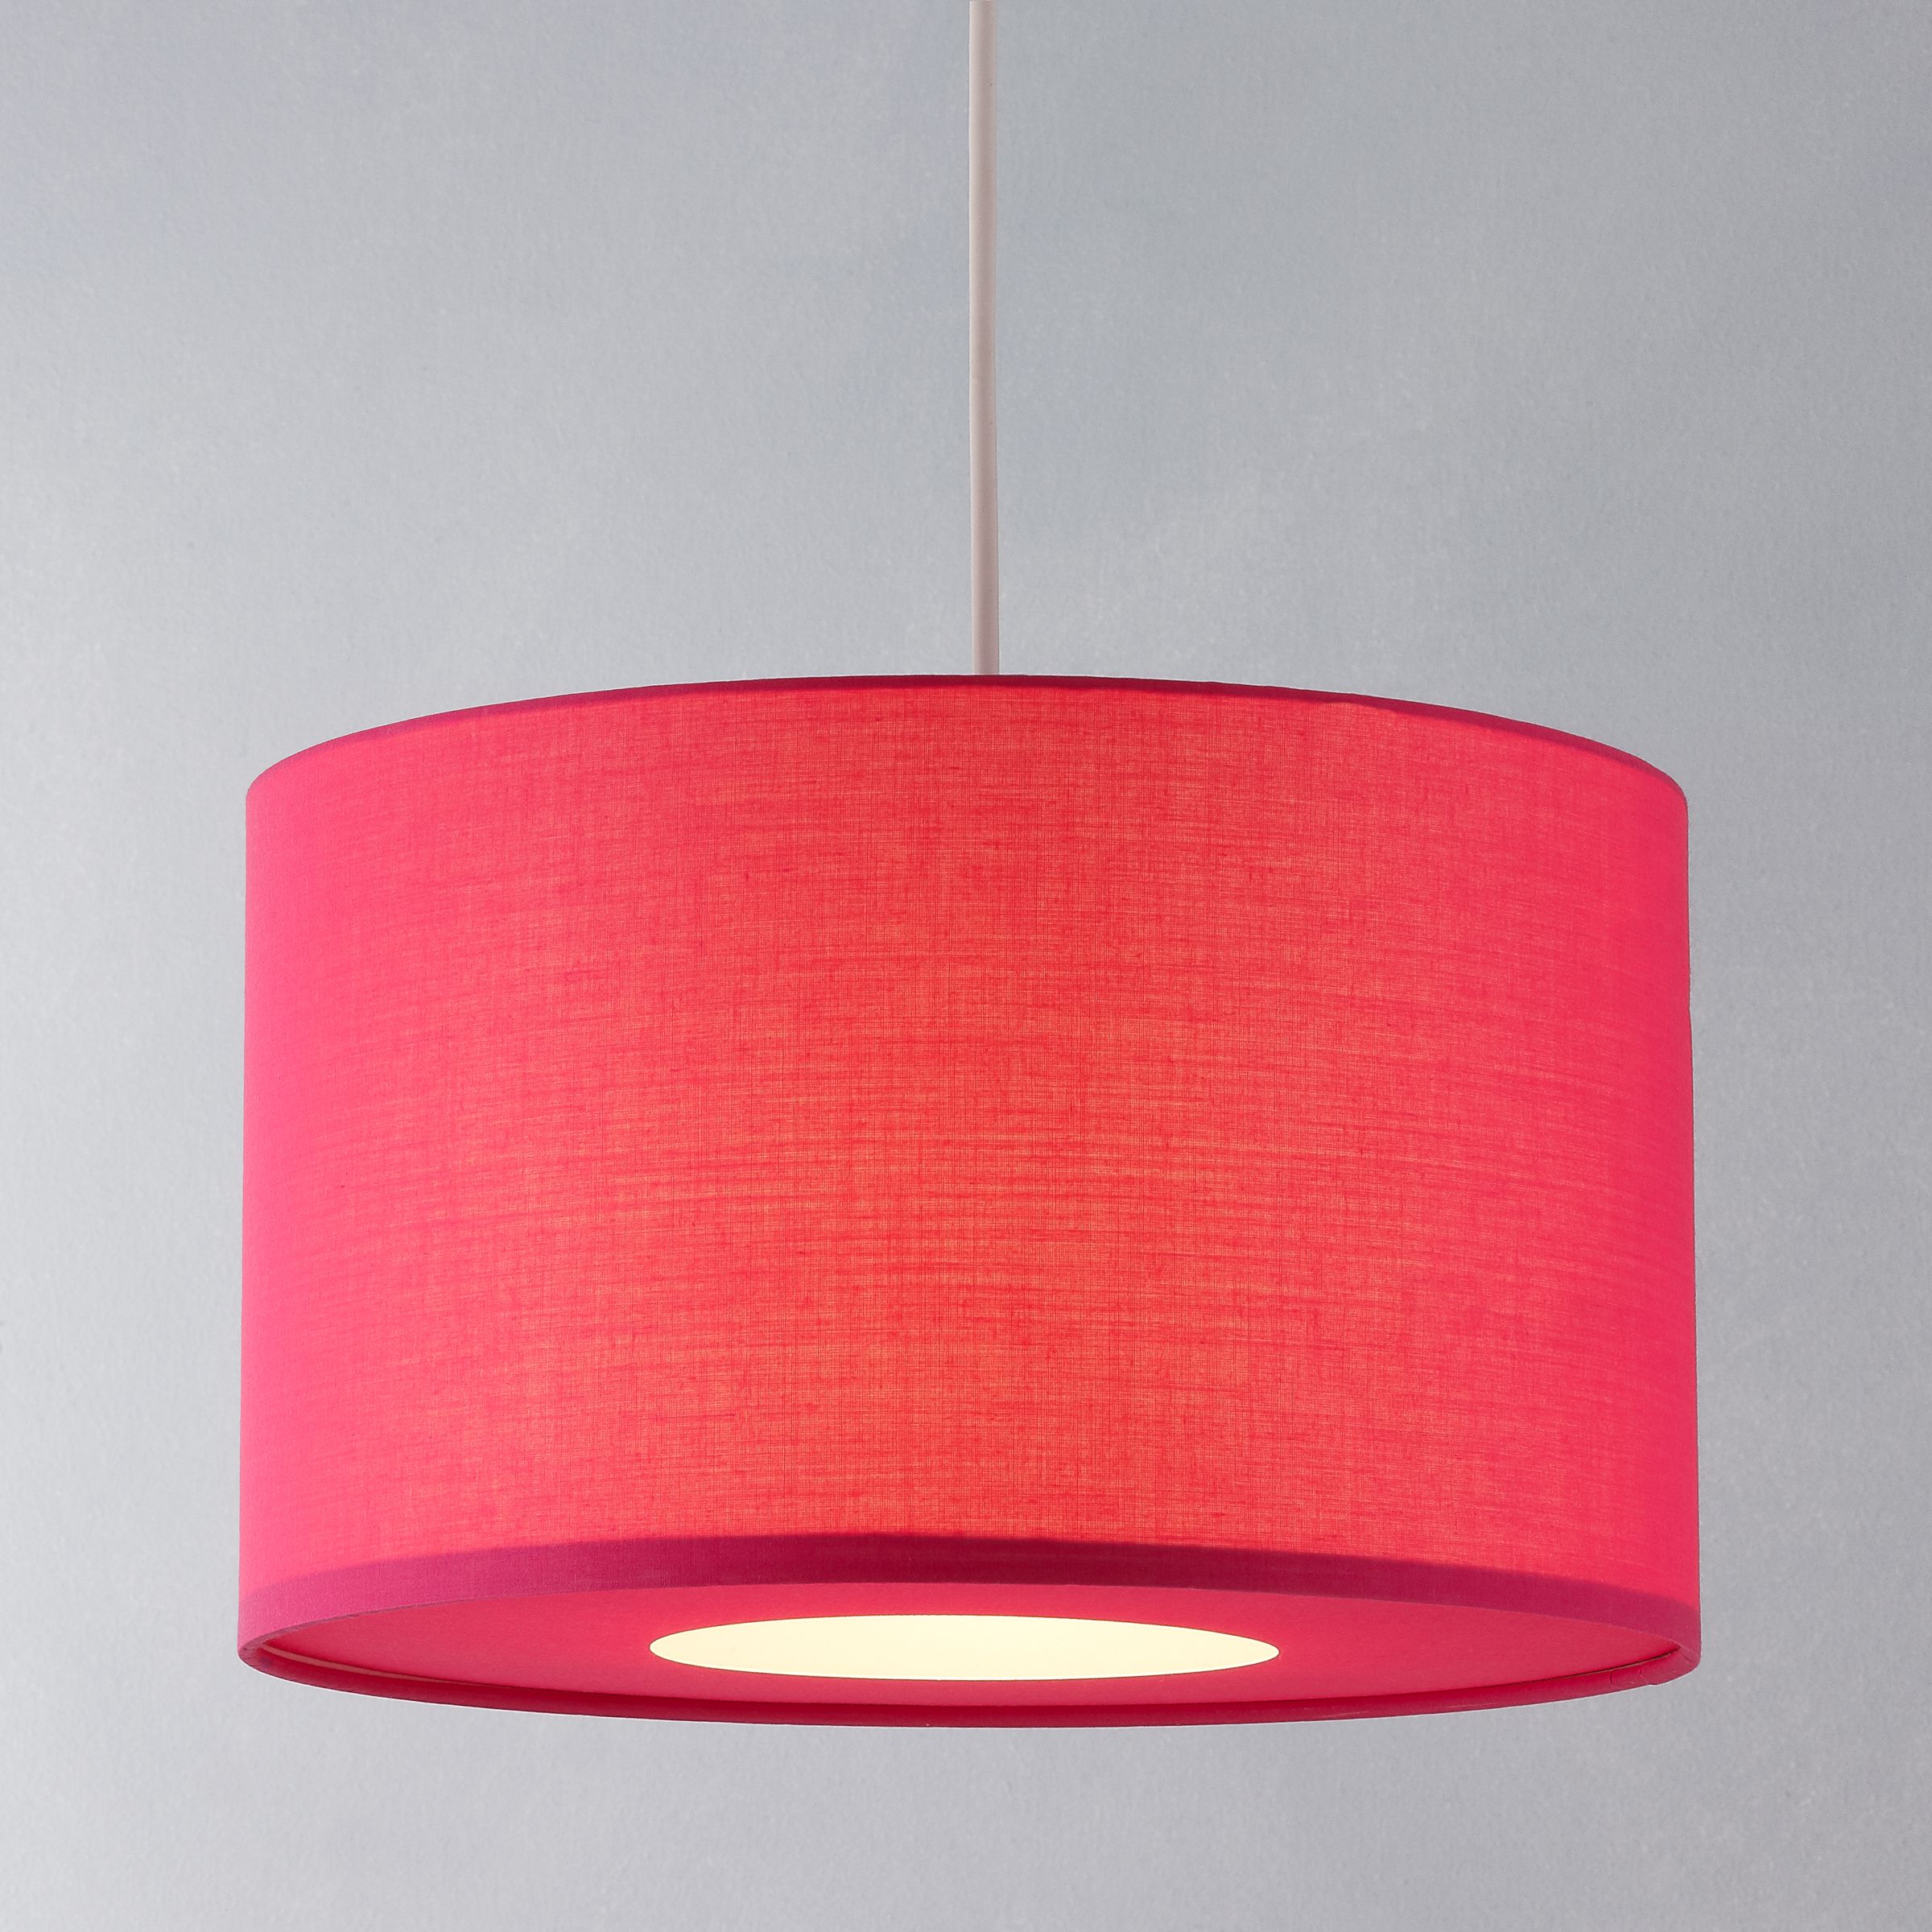 Lamp Shades Online on To Fit Jolie Ceiling Shade  Pink Online At Johnlewis Com   John Lewis